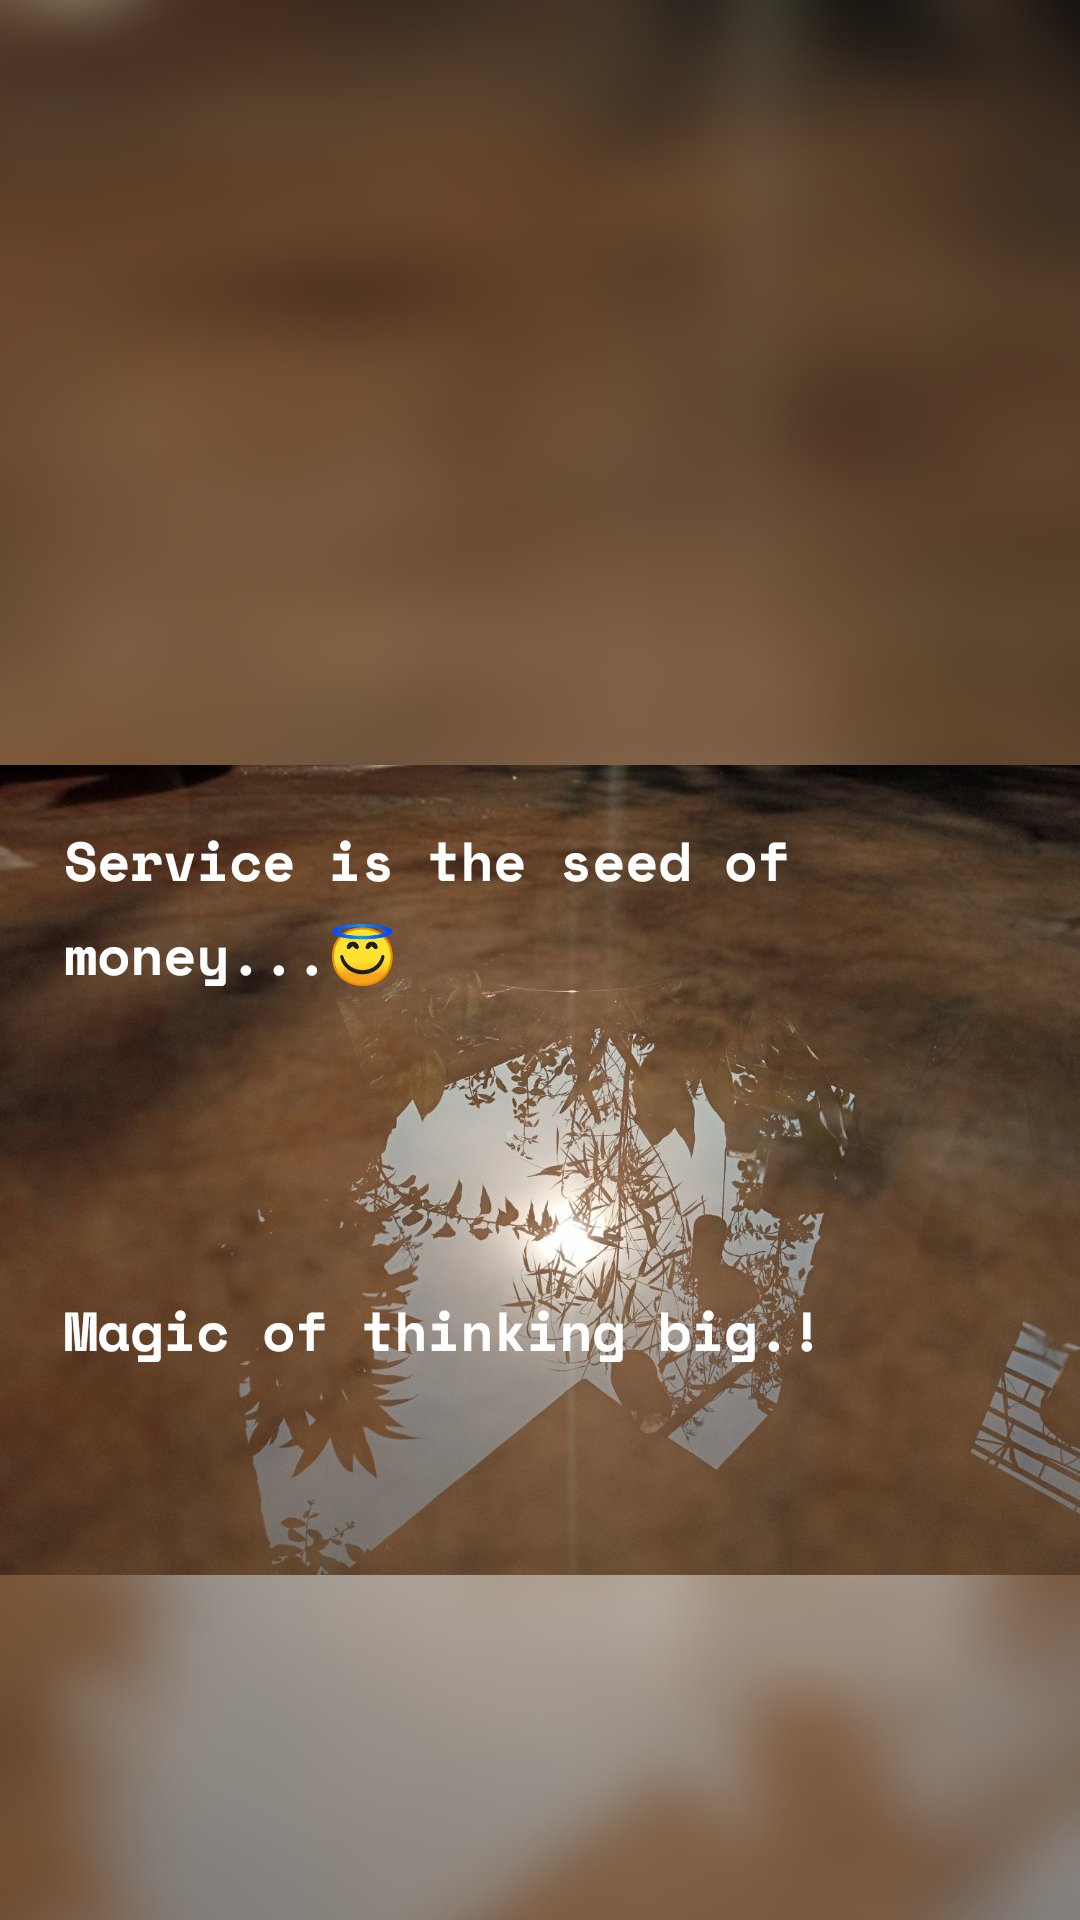 Service is the seed of money...😇



Magic of thinking big.! 